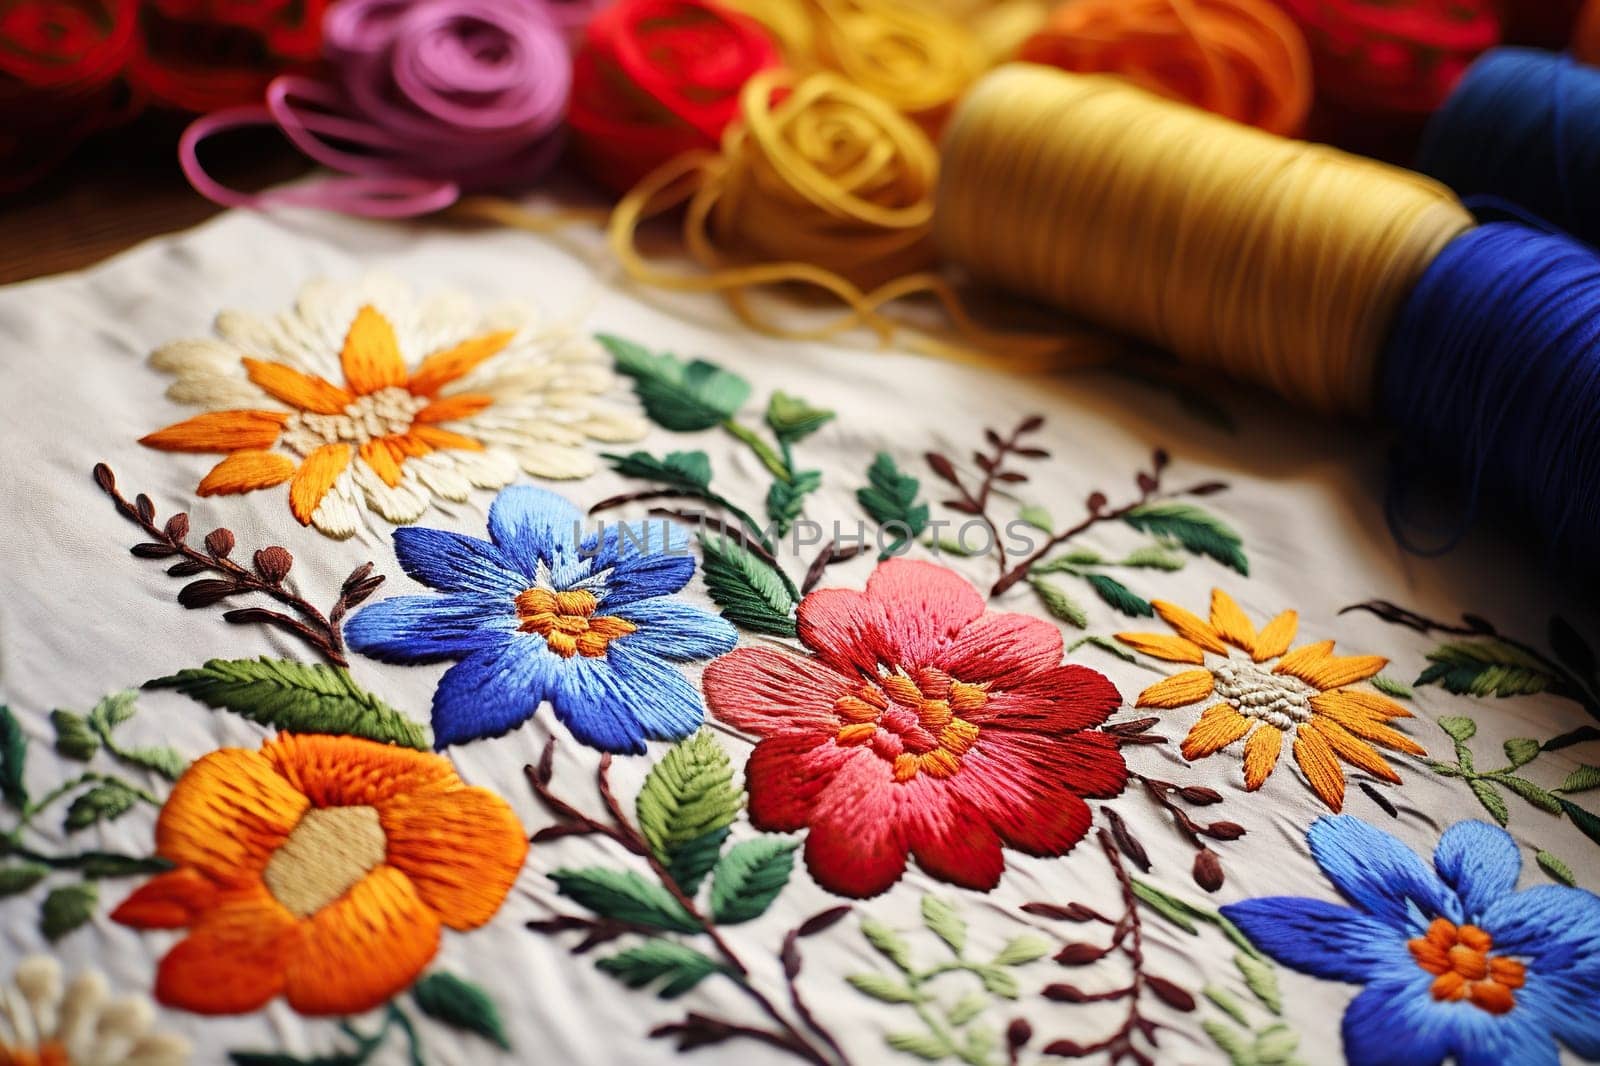 Embroidery. Flowers embroidered with multi-colored threads on canvas.